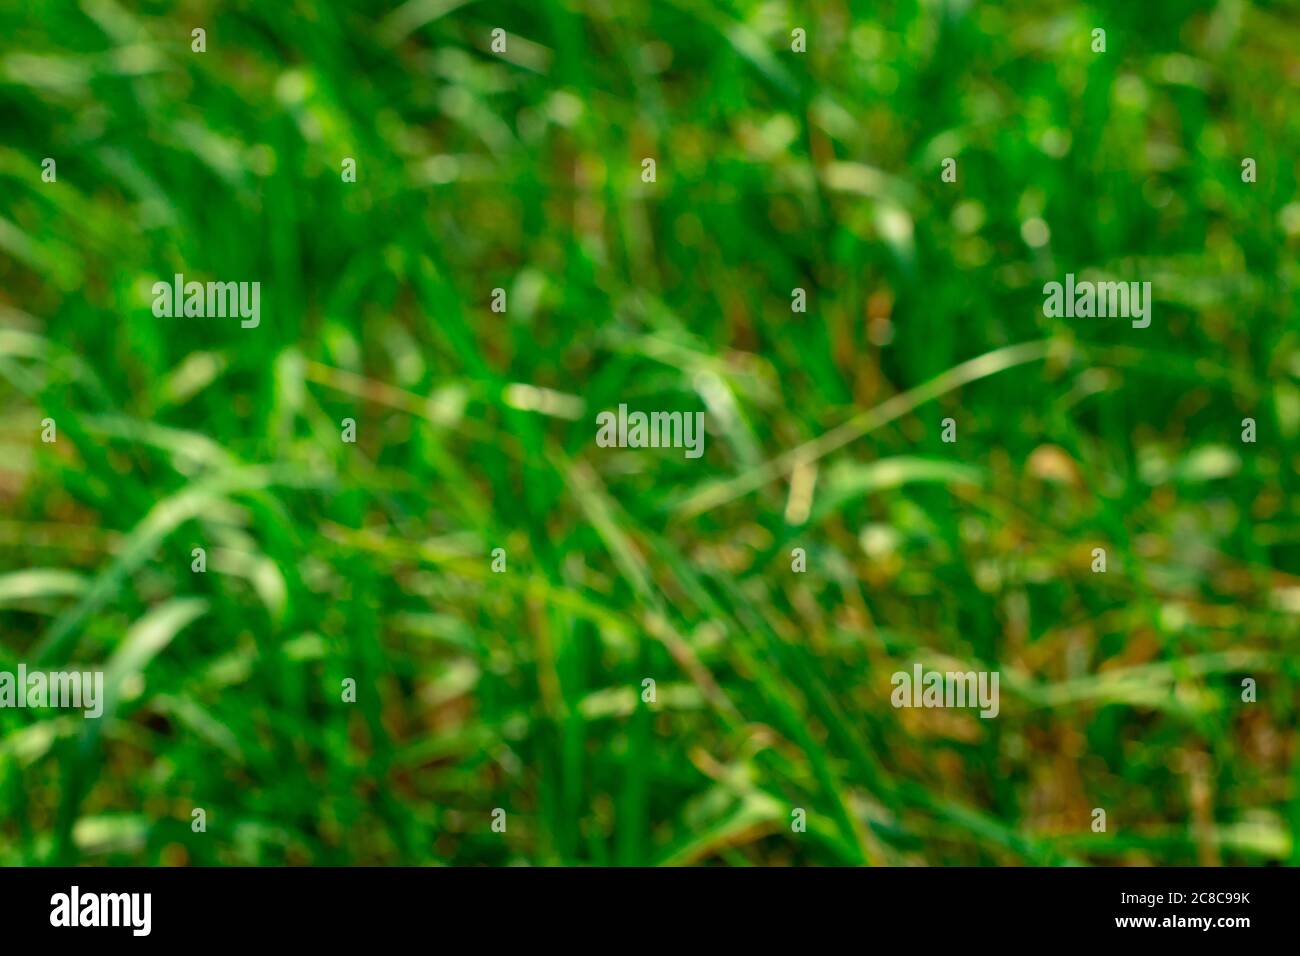 Blurry green grass background copy space. Design template. Backdrop of nature. Out of focus photo Stock Photo